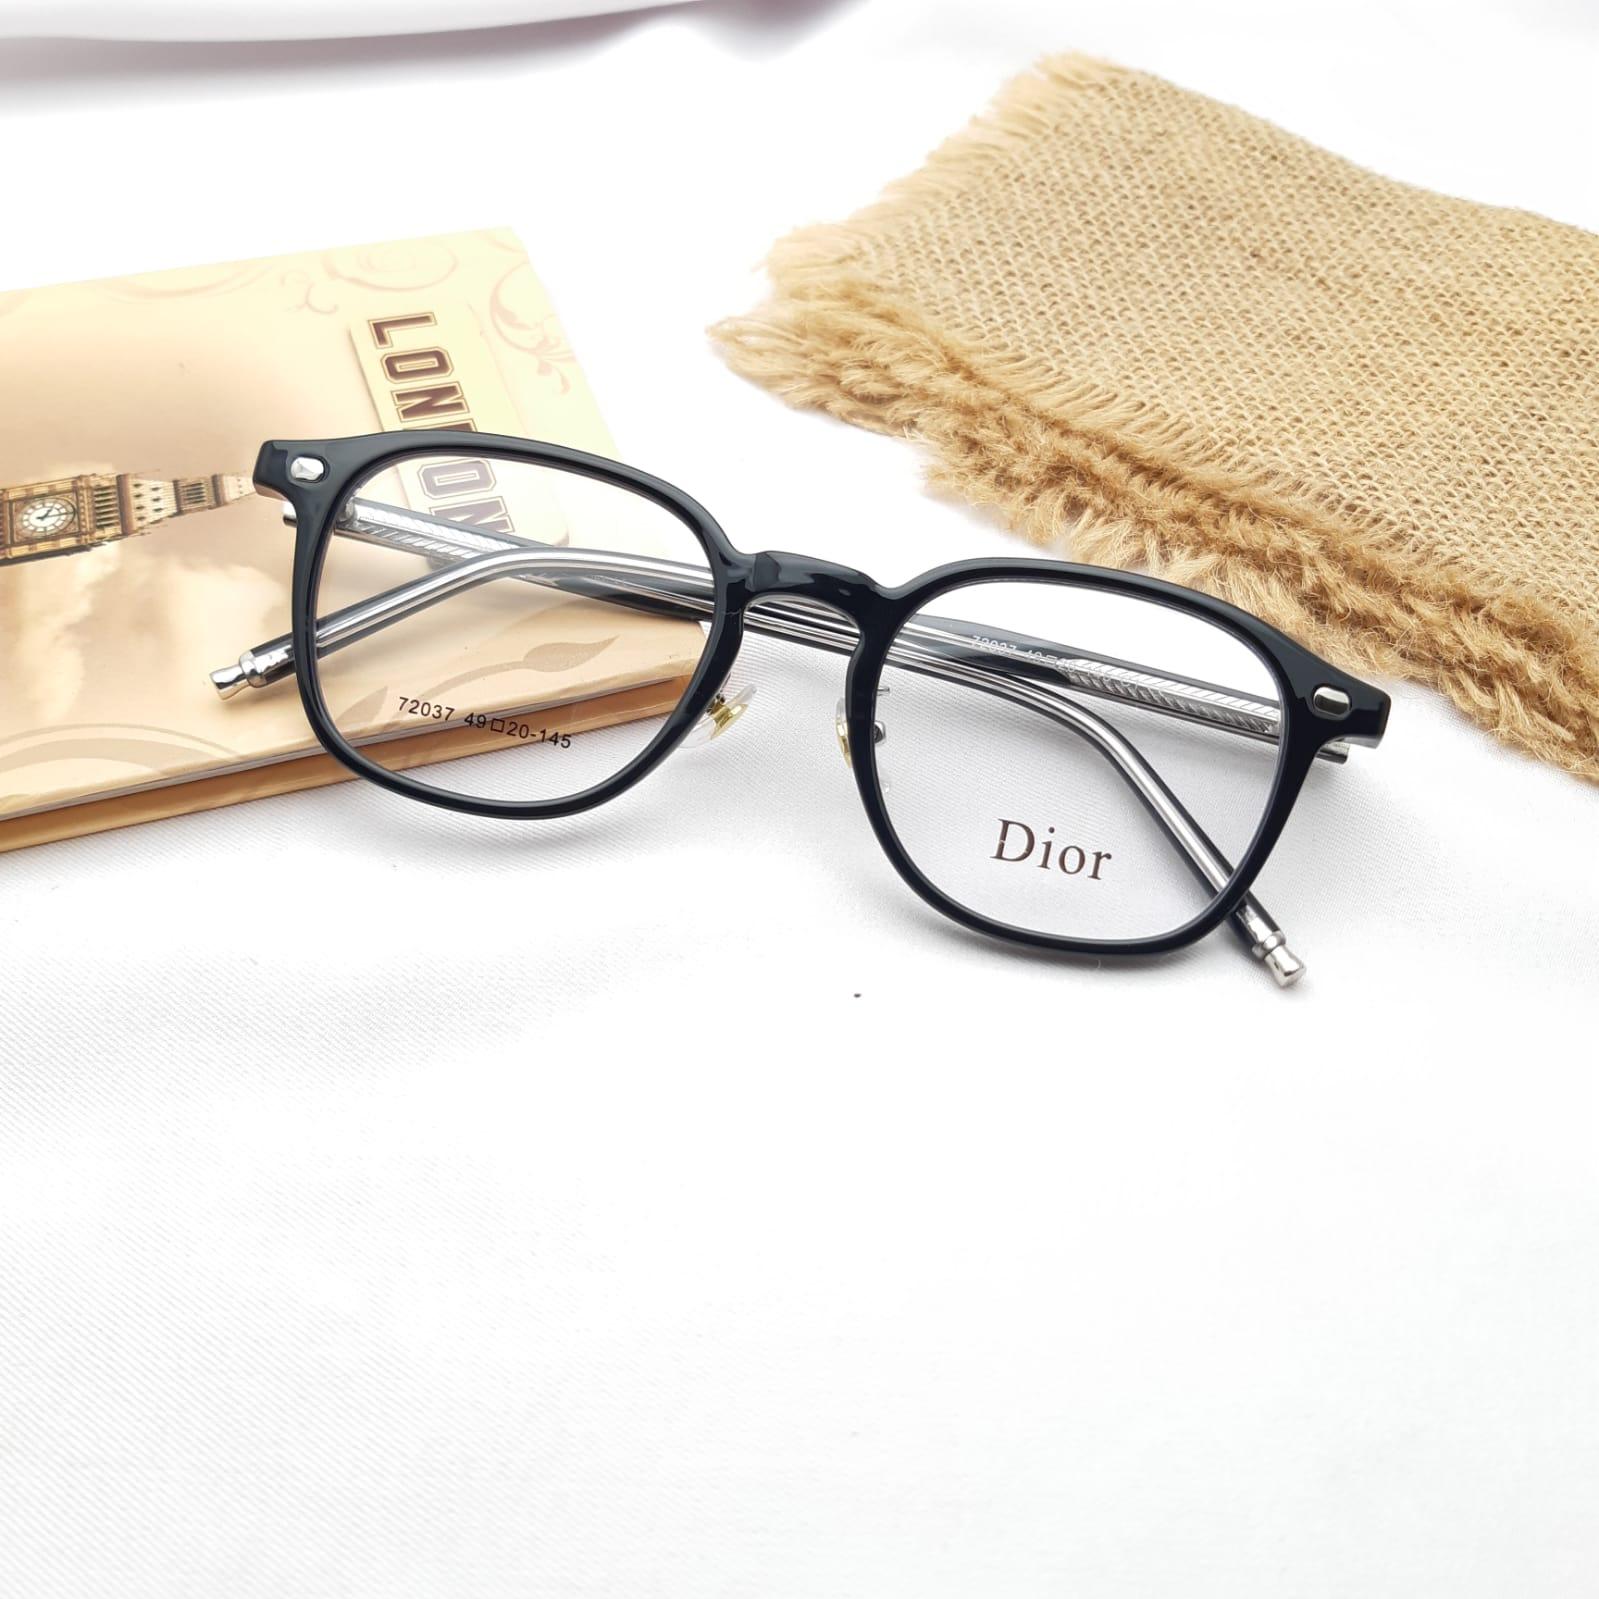 Dior spectacles 82201 - Customized Prescription Sunglasses and Spectacles